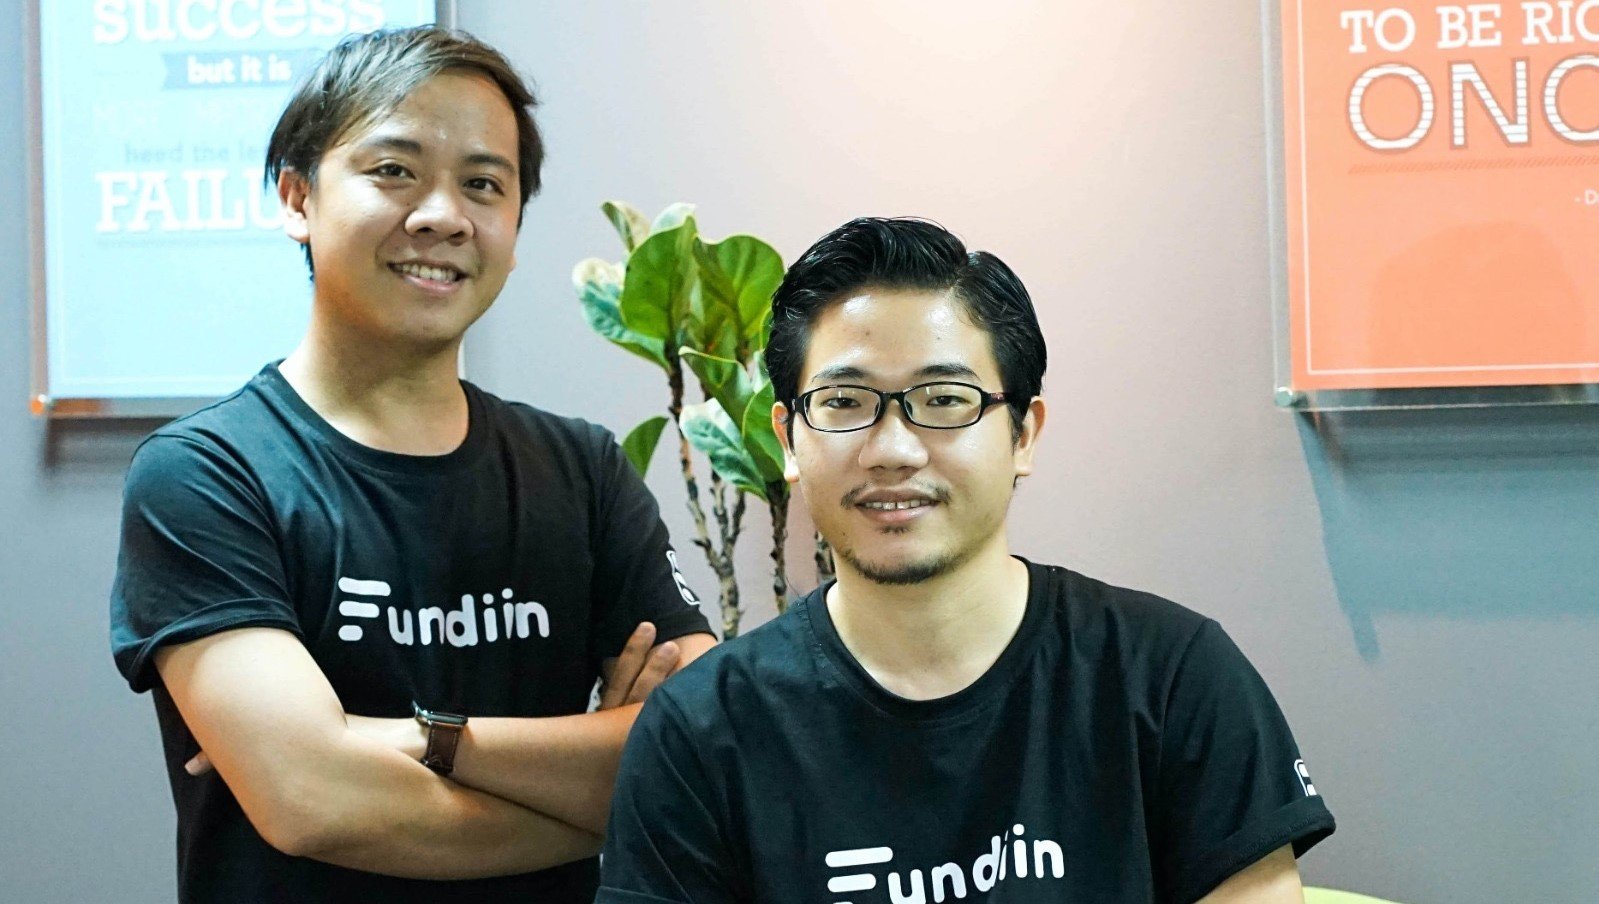 Fundiin co-founders Cuong Anh Nguyen (CEO) and Nam Hoang Vo (CTO)